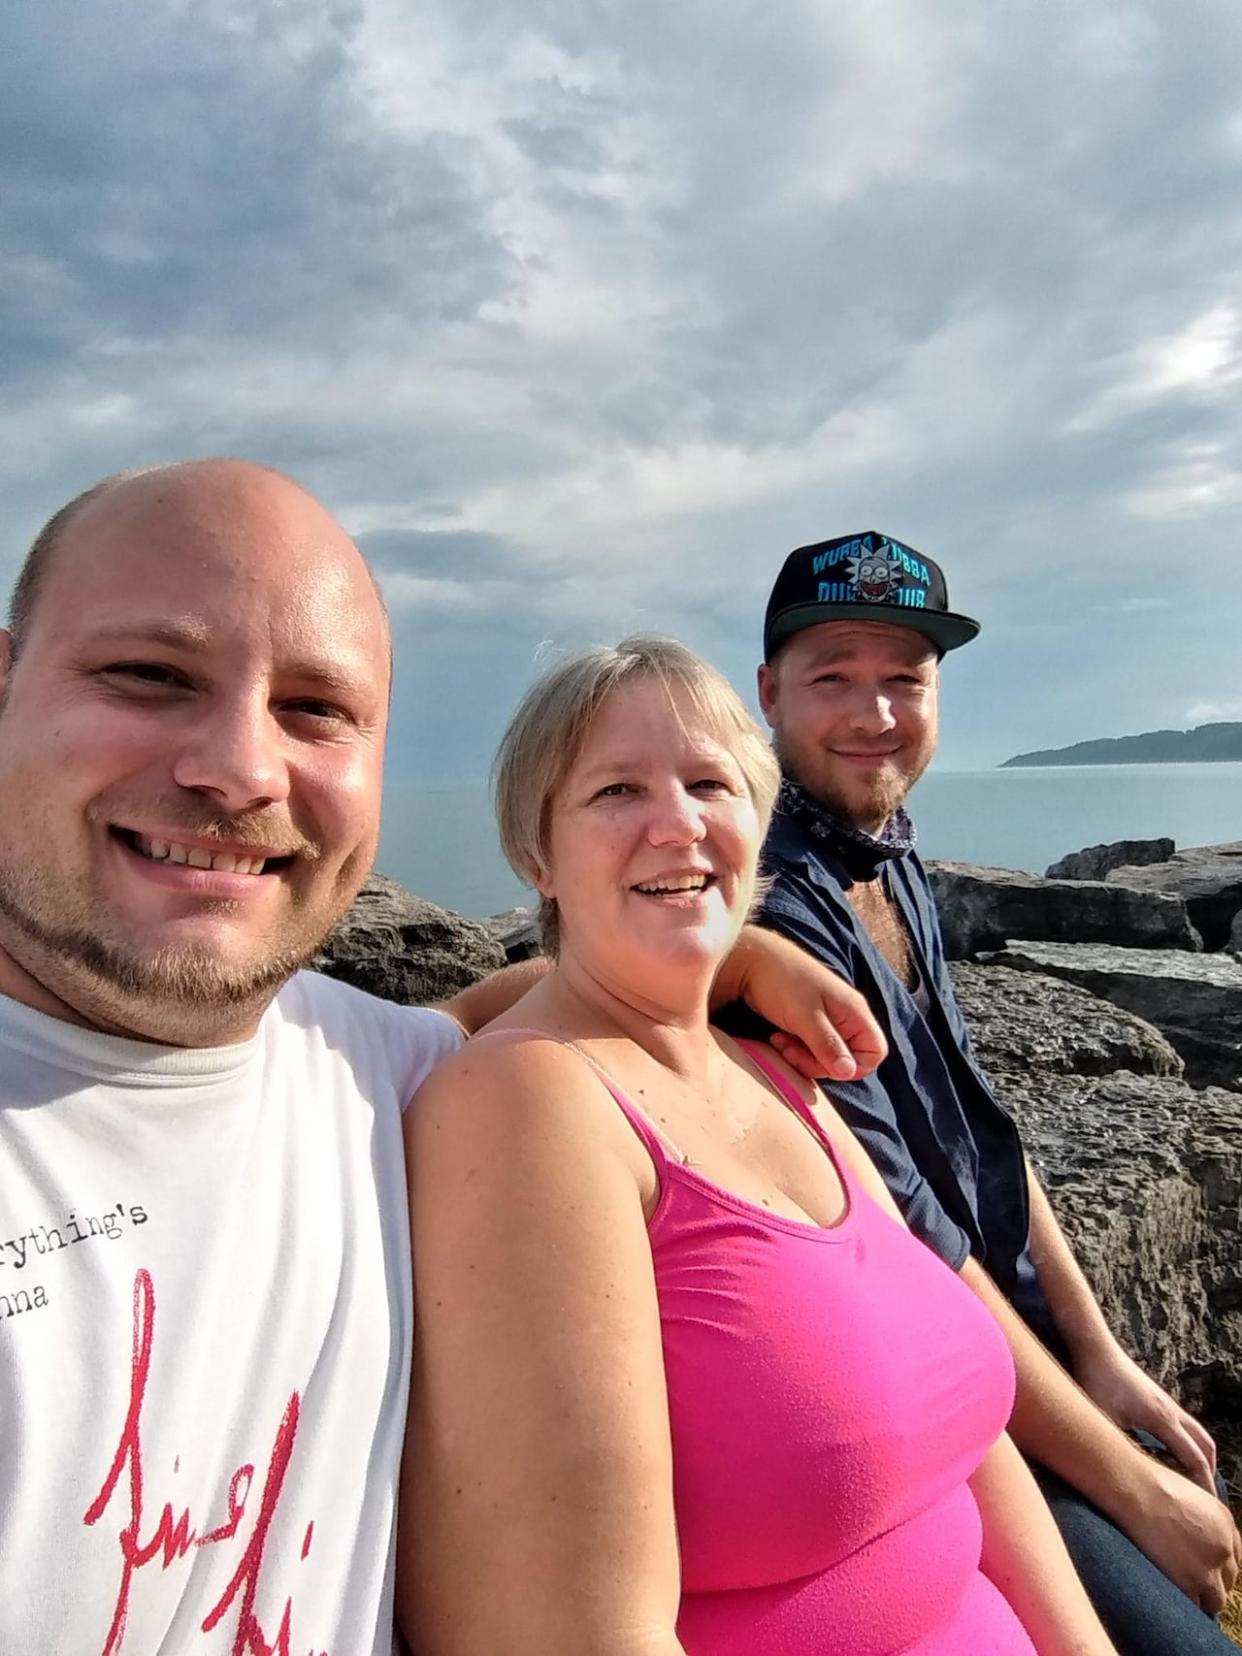 Gabriele Schart, centre, was killed in Mexico on Saturday, say her sons, Corin, right, and Michael, left. They're working to get answers from authorities in Mexico and  prepare a funeral in Zipolite, where their mother lived for the last decade.  (Supplied by Raquel Shulman - image credit)